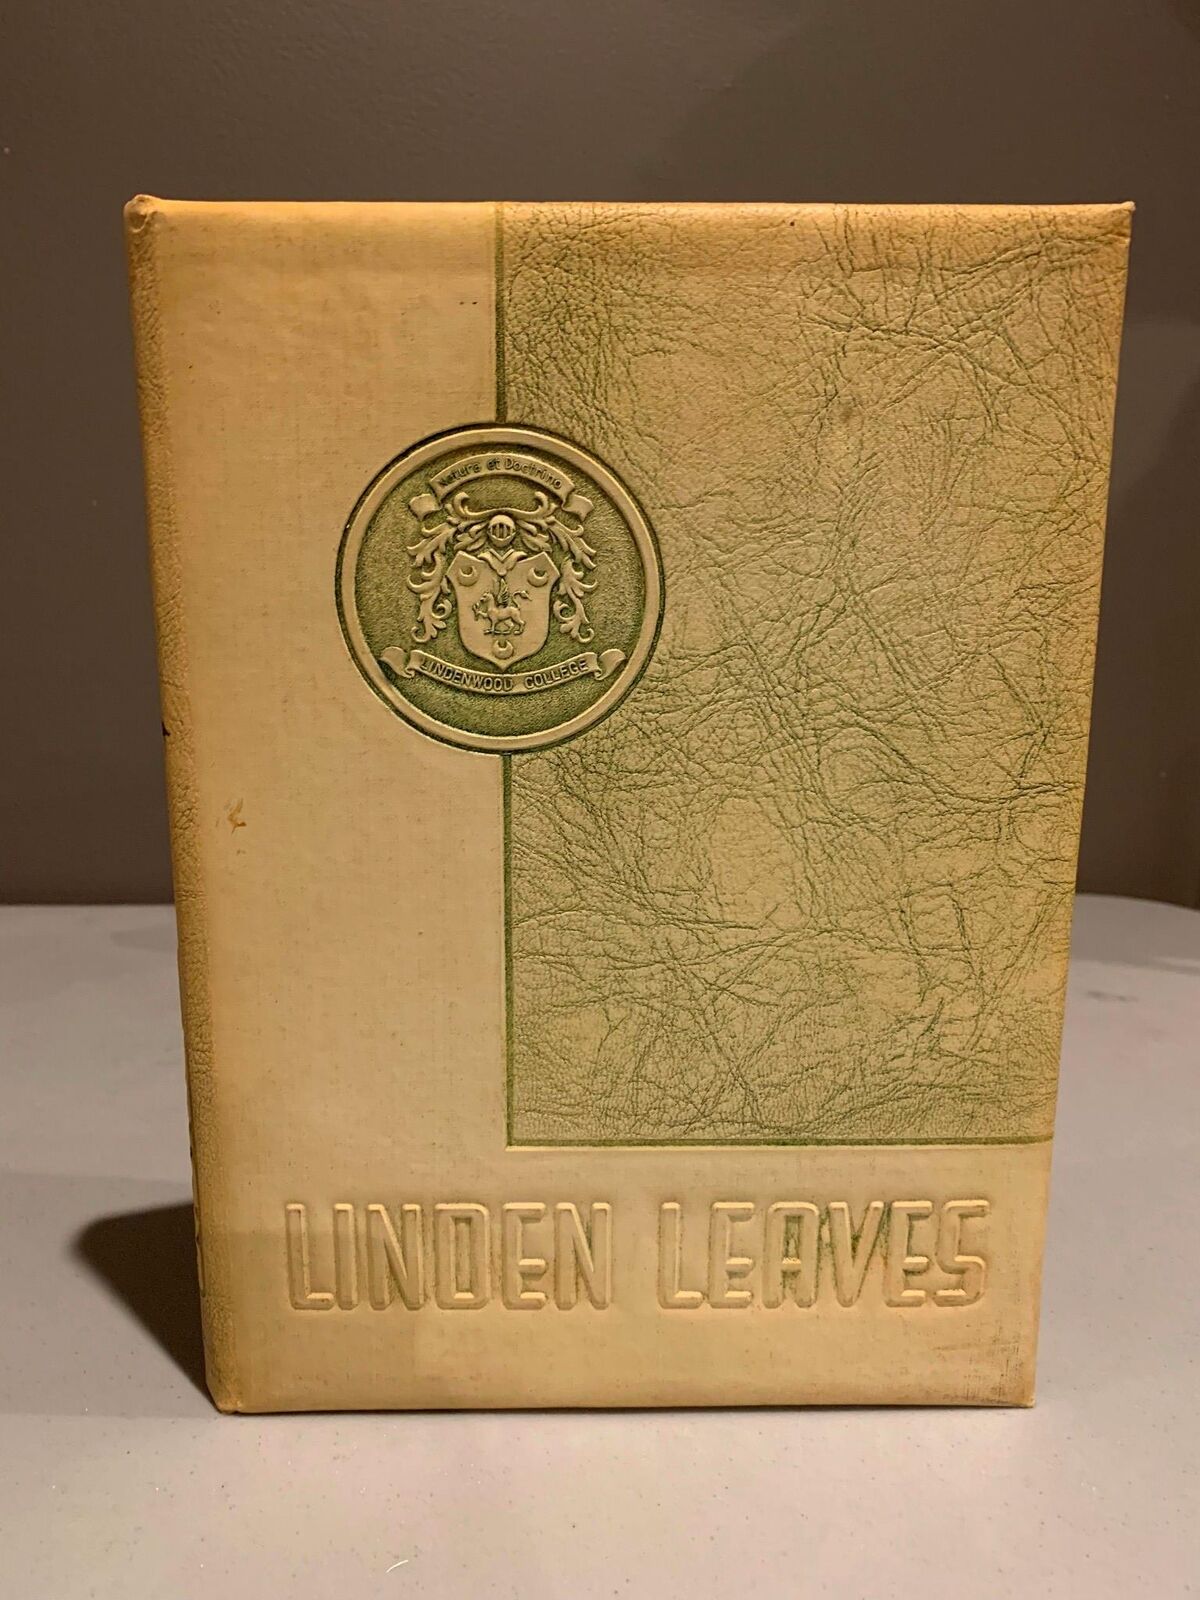 1953 Lindenwood College Yearbook - St Charles, MO - Linden Leaves